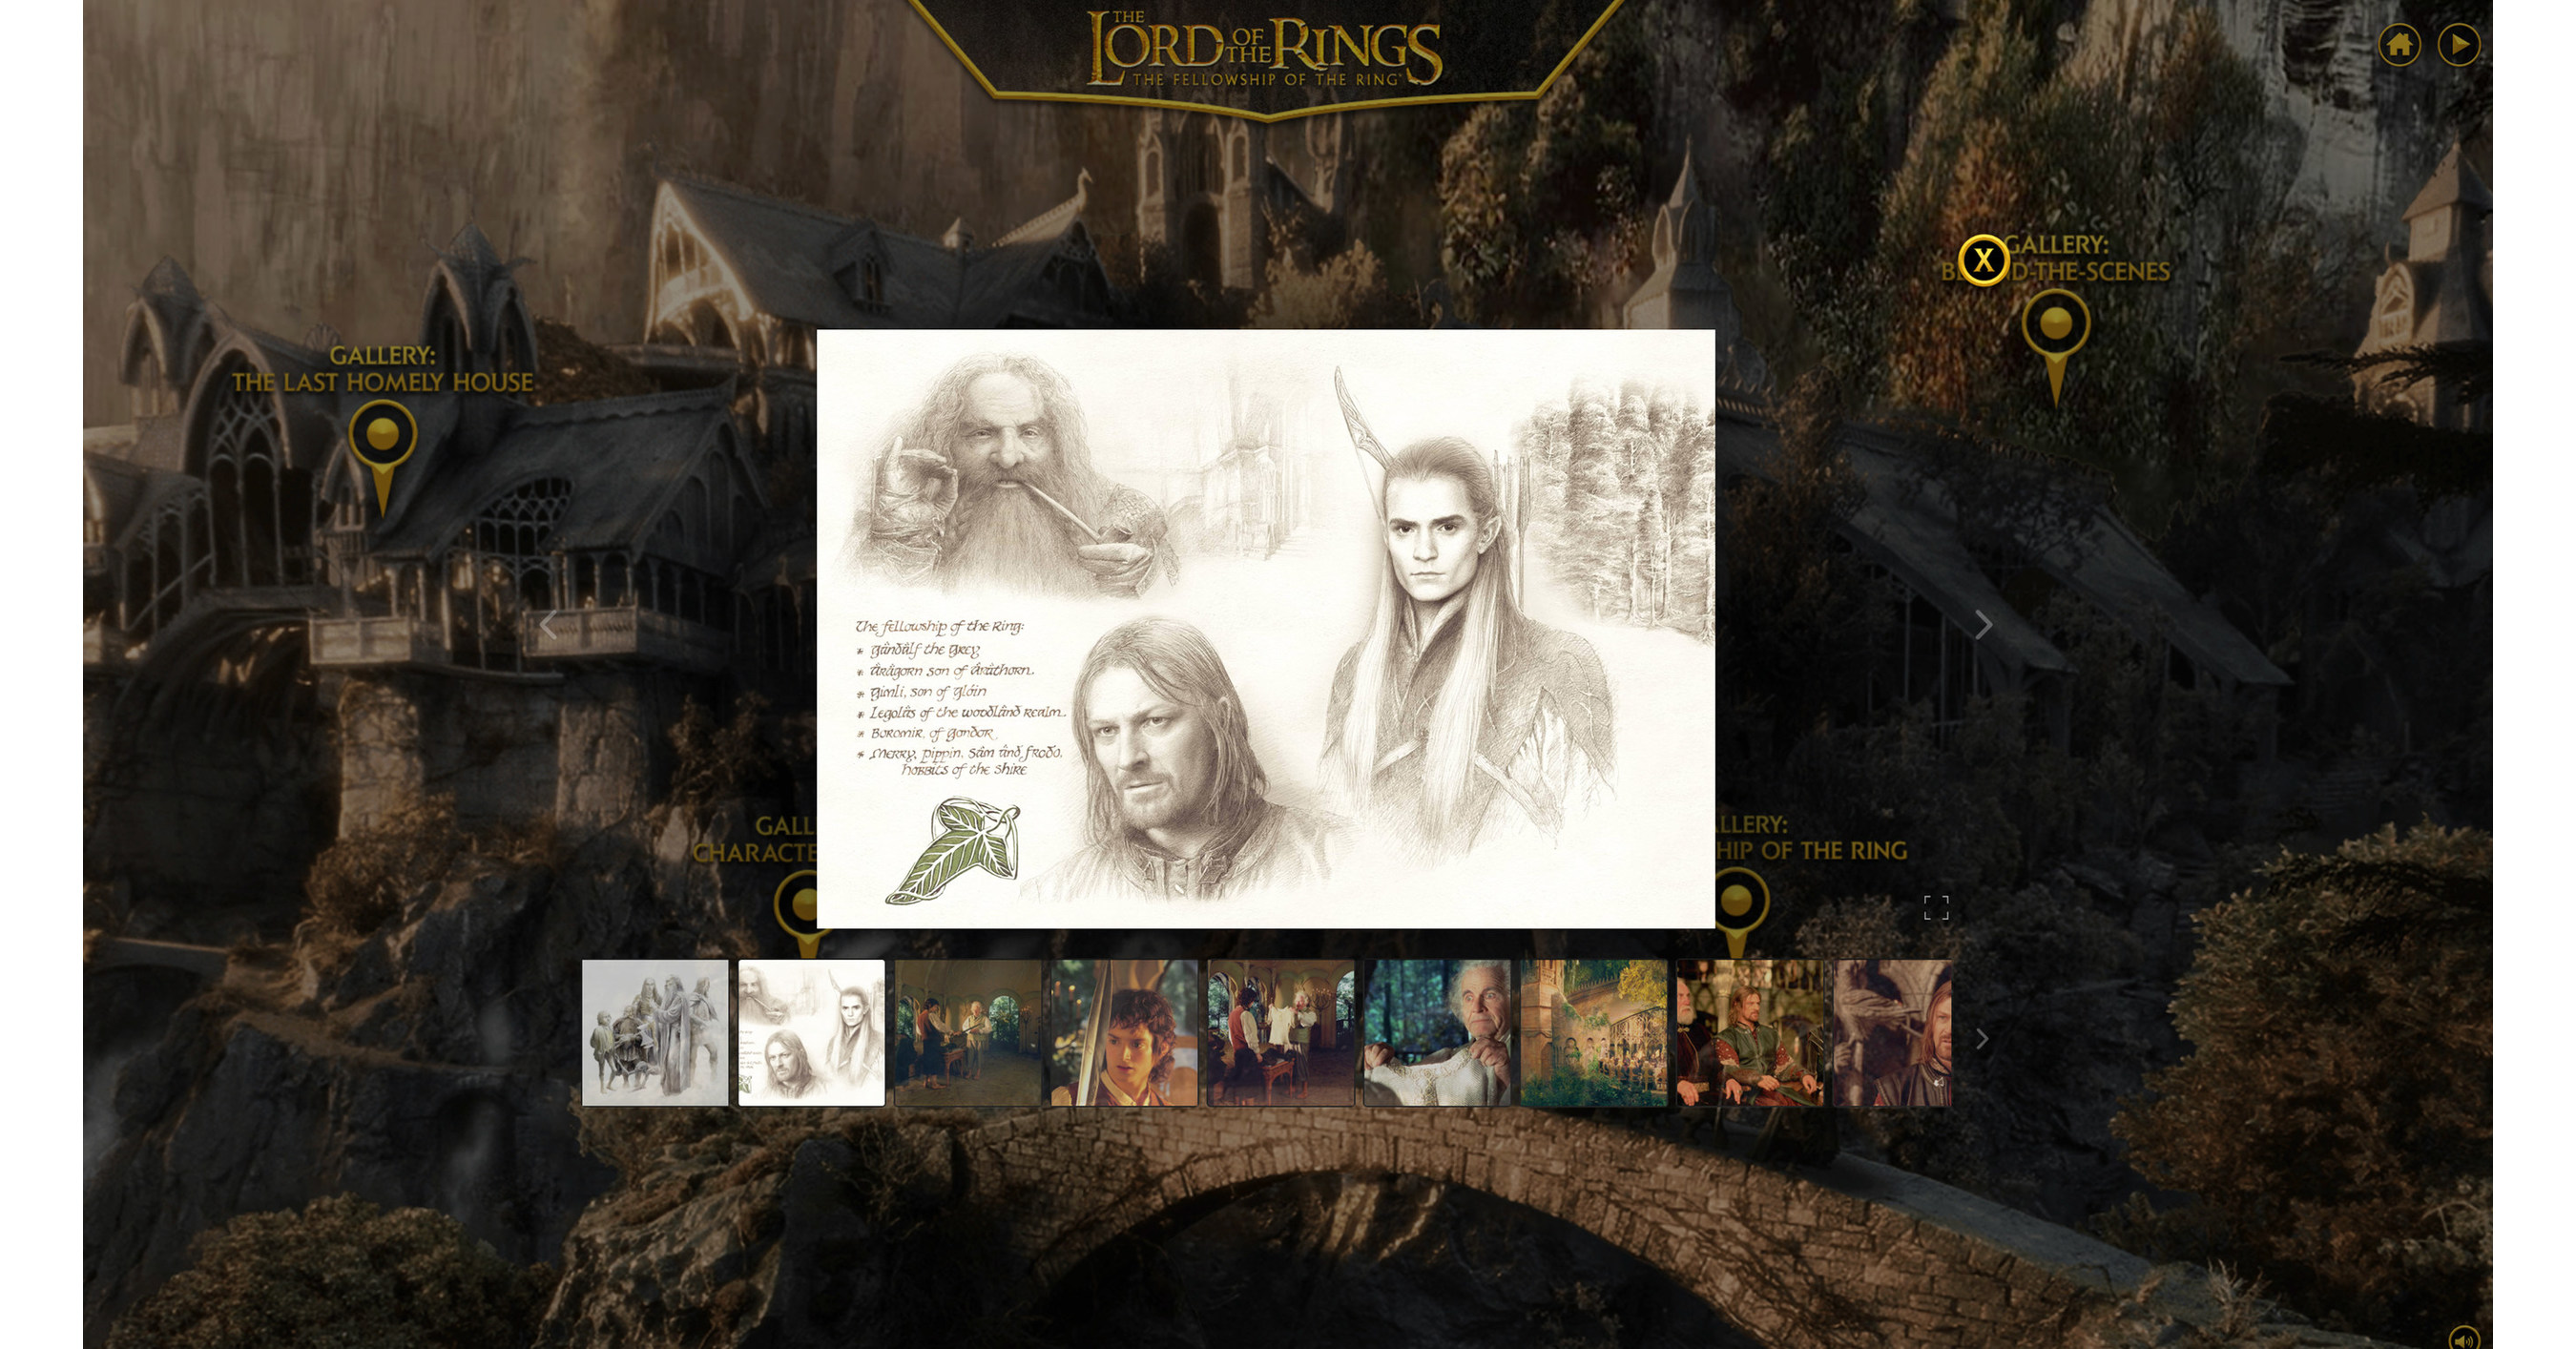 The Art of the Fellowship of the Ring 